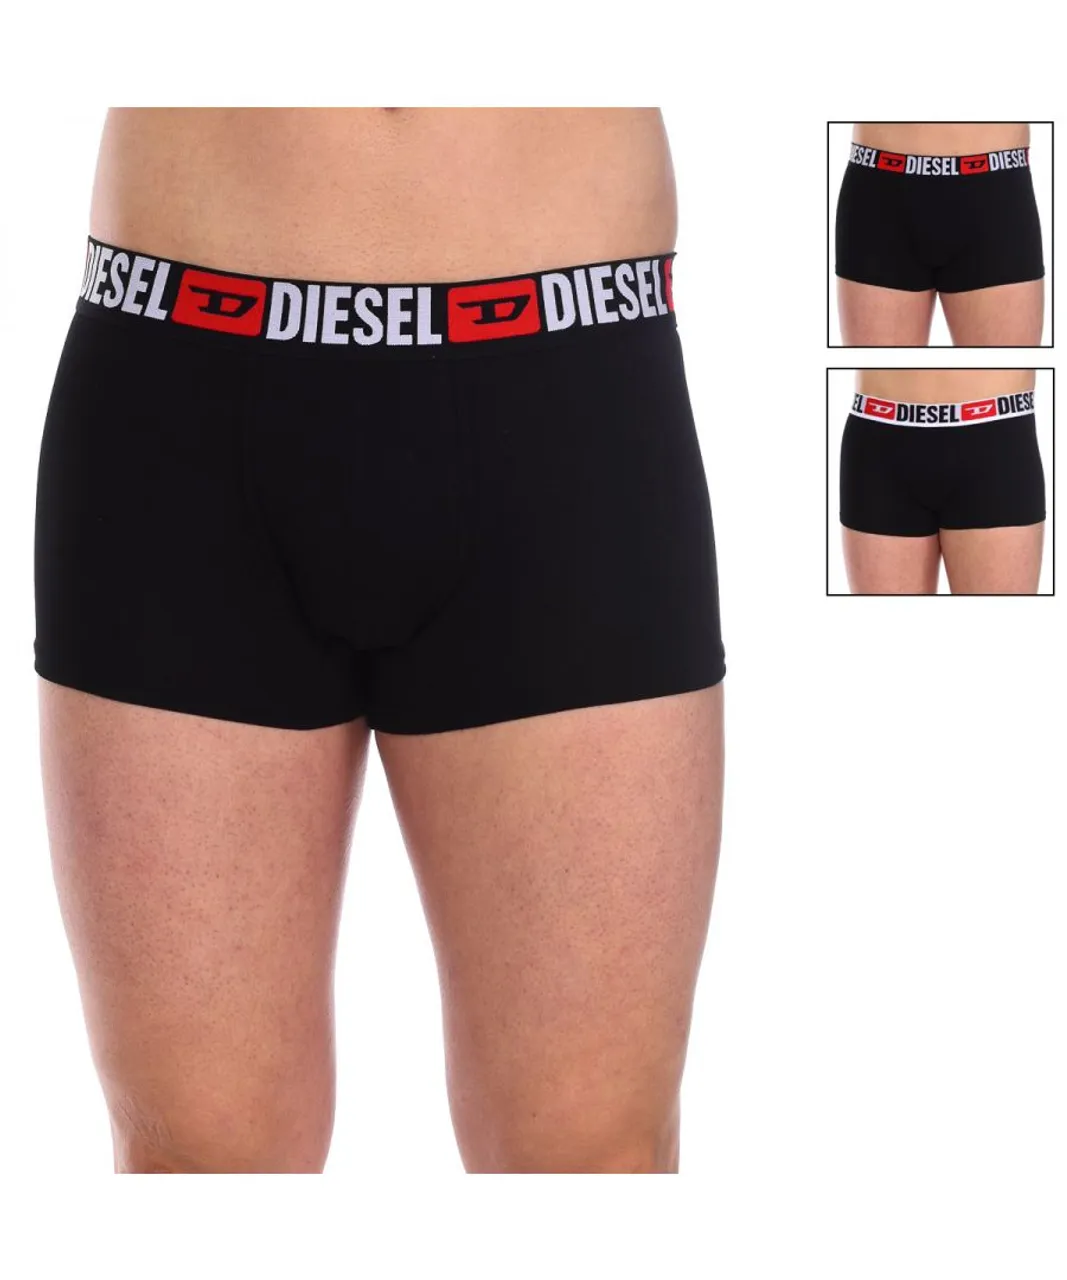 Diesel Mens Pack-3 Breathable fabric boxers with anatomical front 00ST3V-0DDAI men - Black